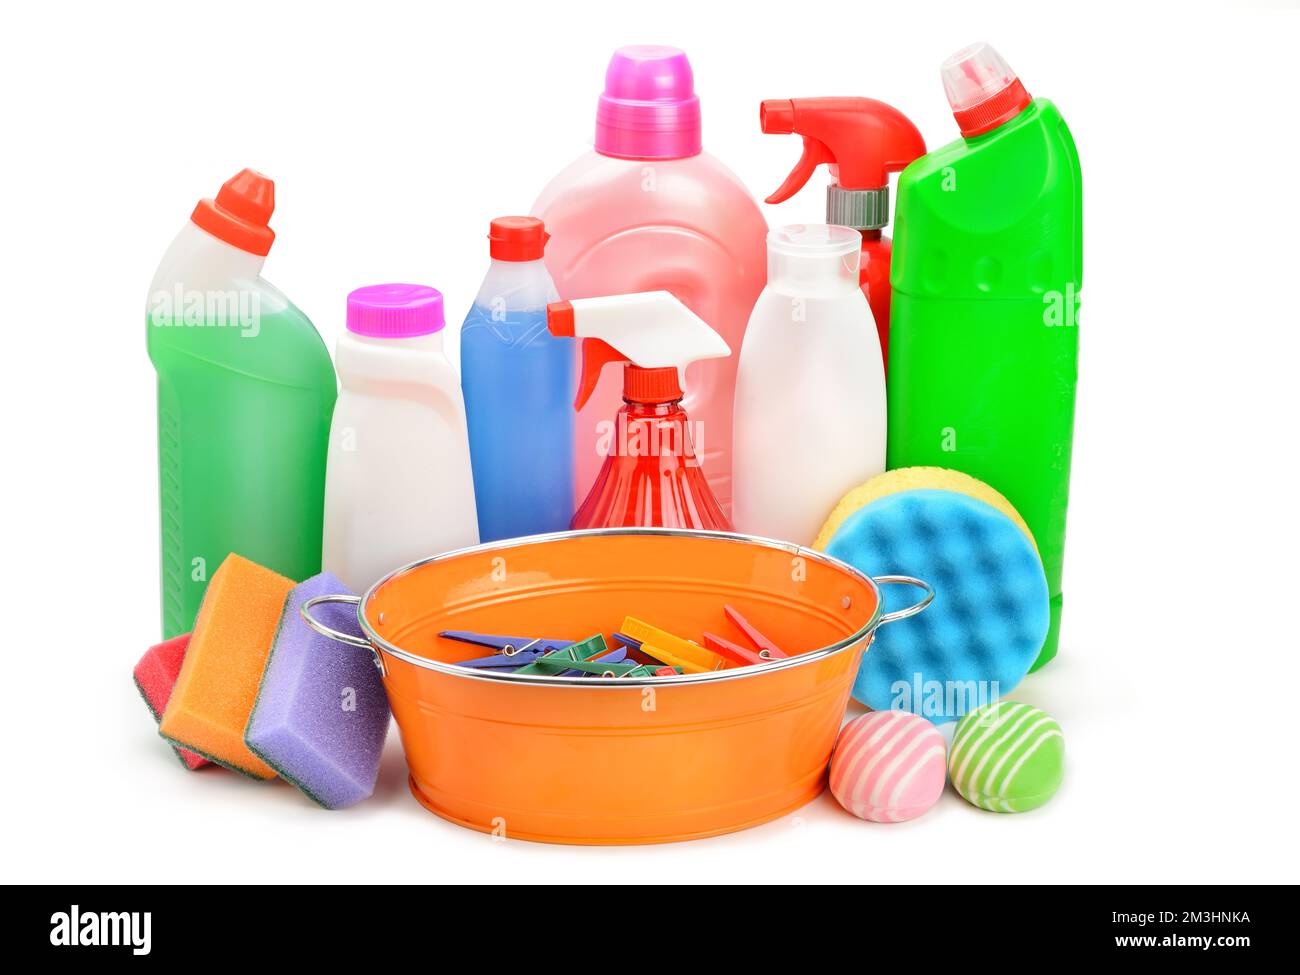 Set of household chemicals, sponges and trough isolated on white background. Stock Photo